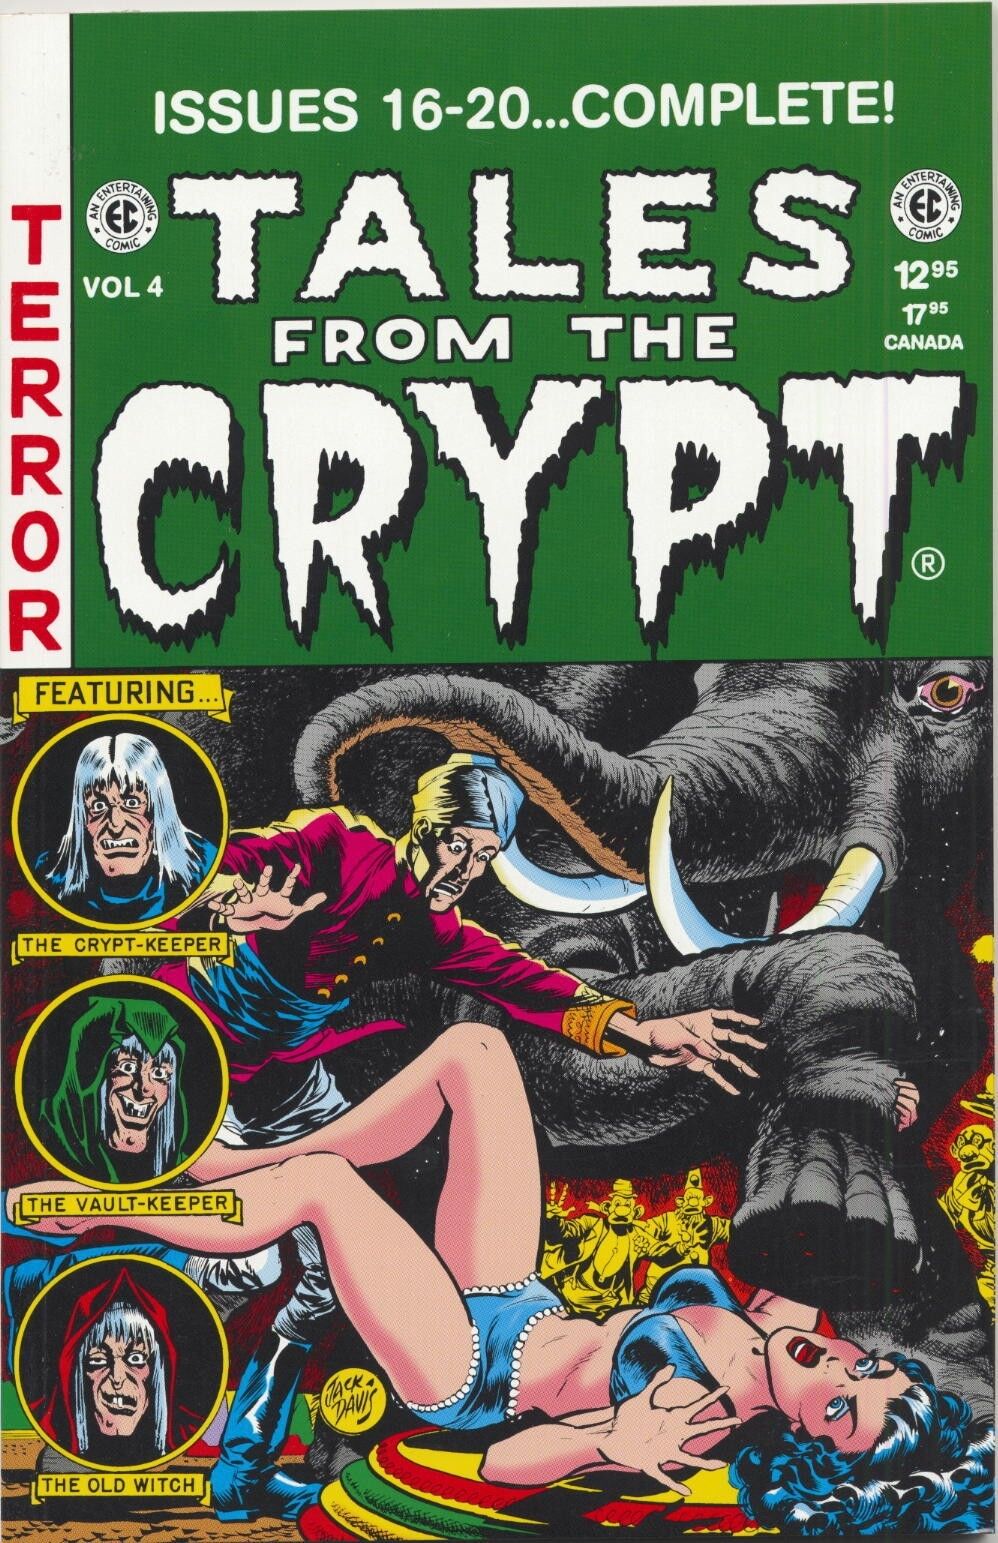 EC Annuals: Tales From The Crypt #4